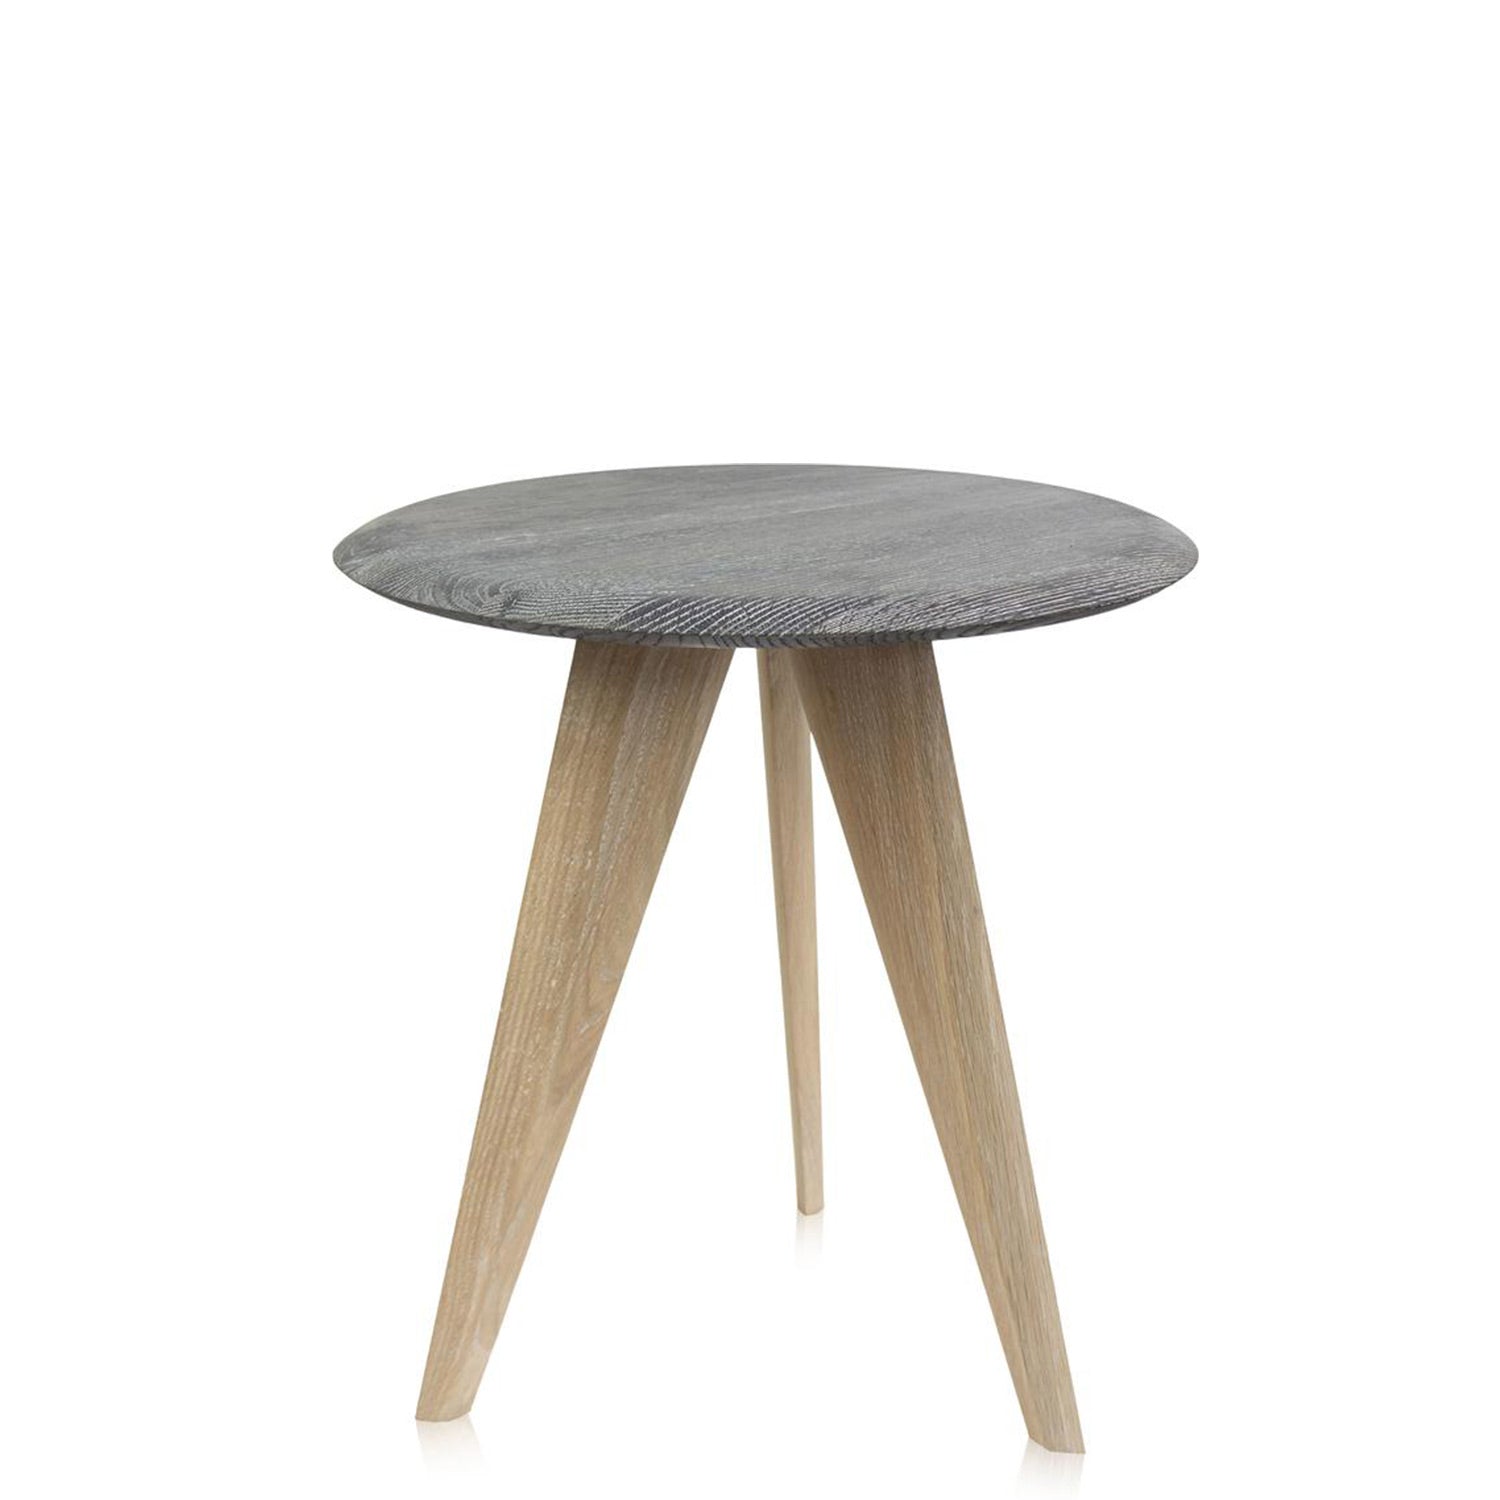 Tera side table